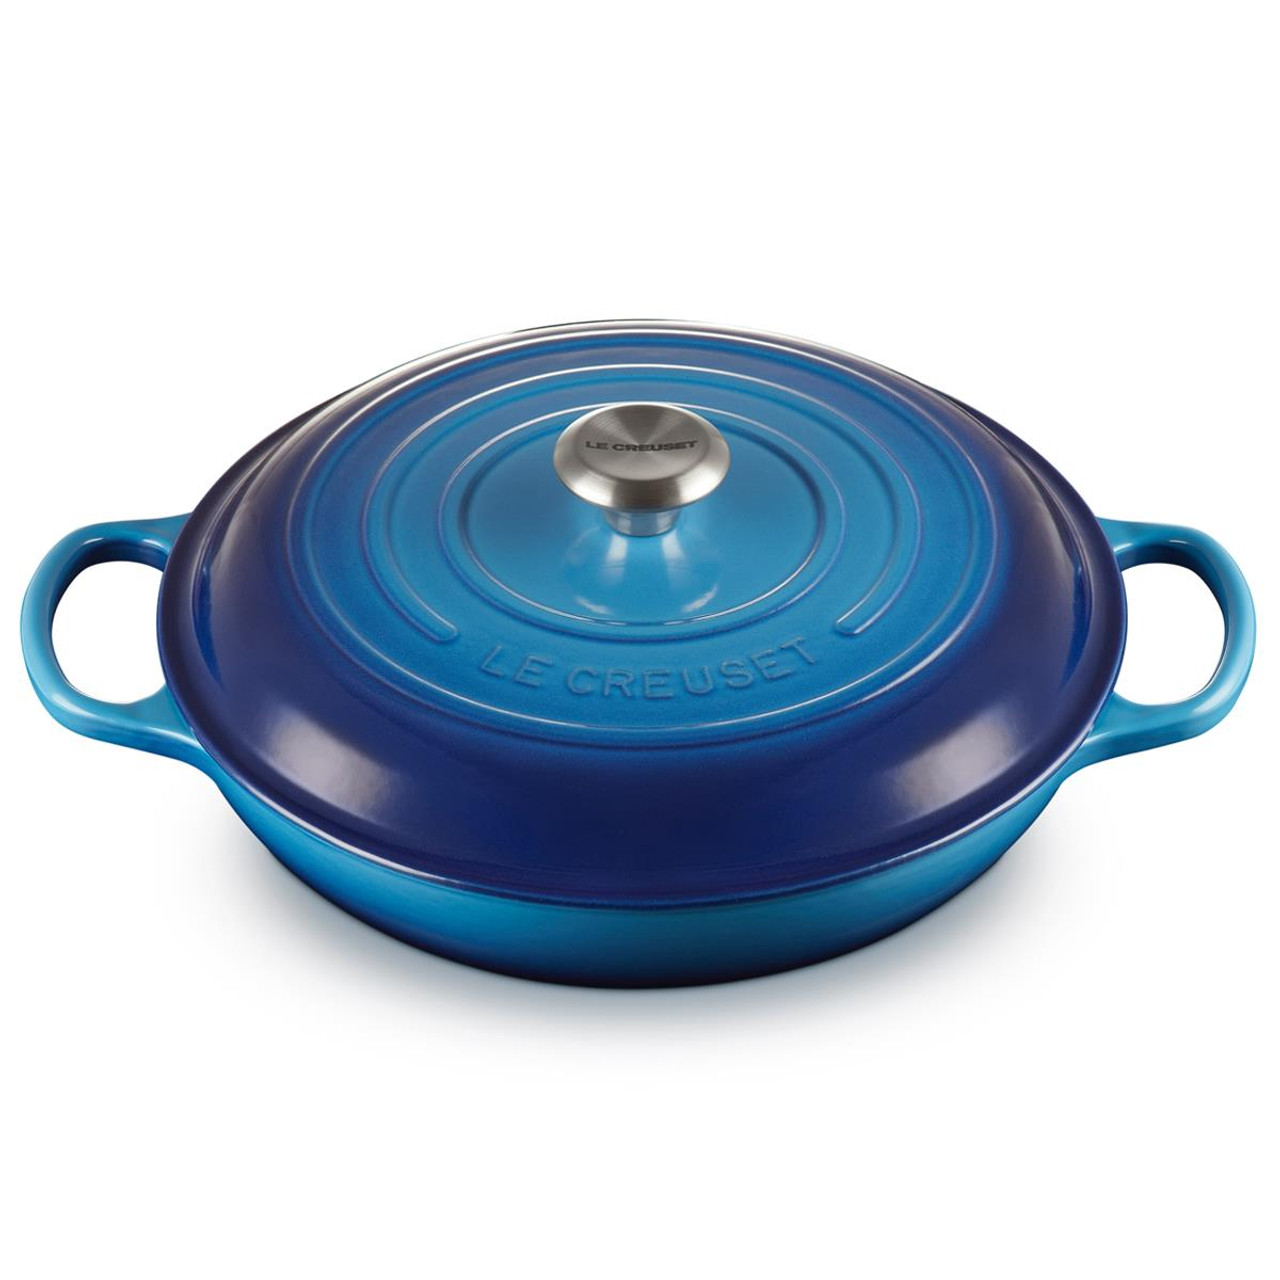 What is the ideal heat for cooking with the le creuset shallow casserole?